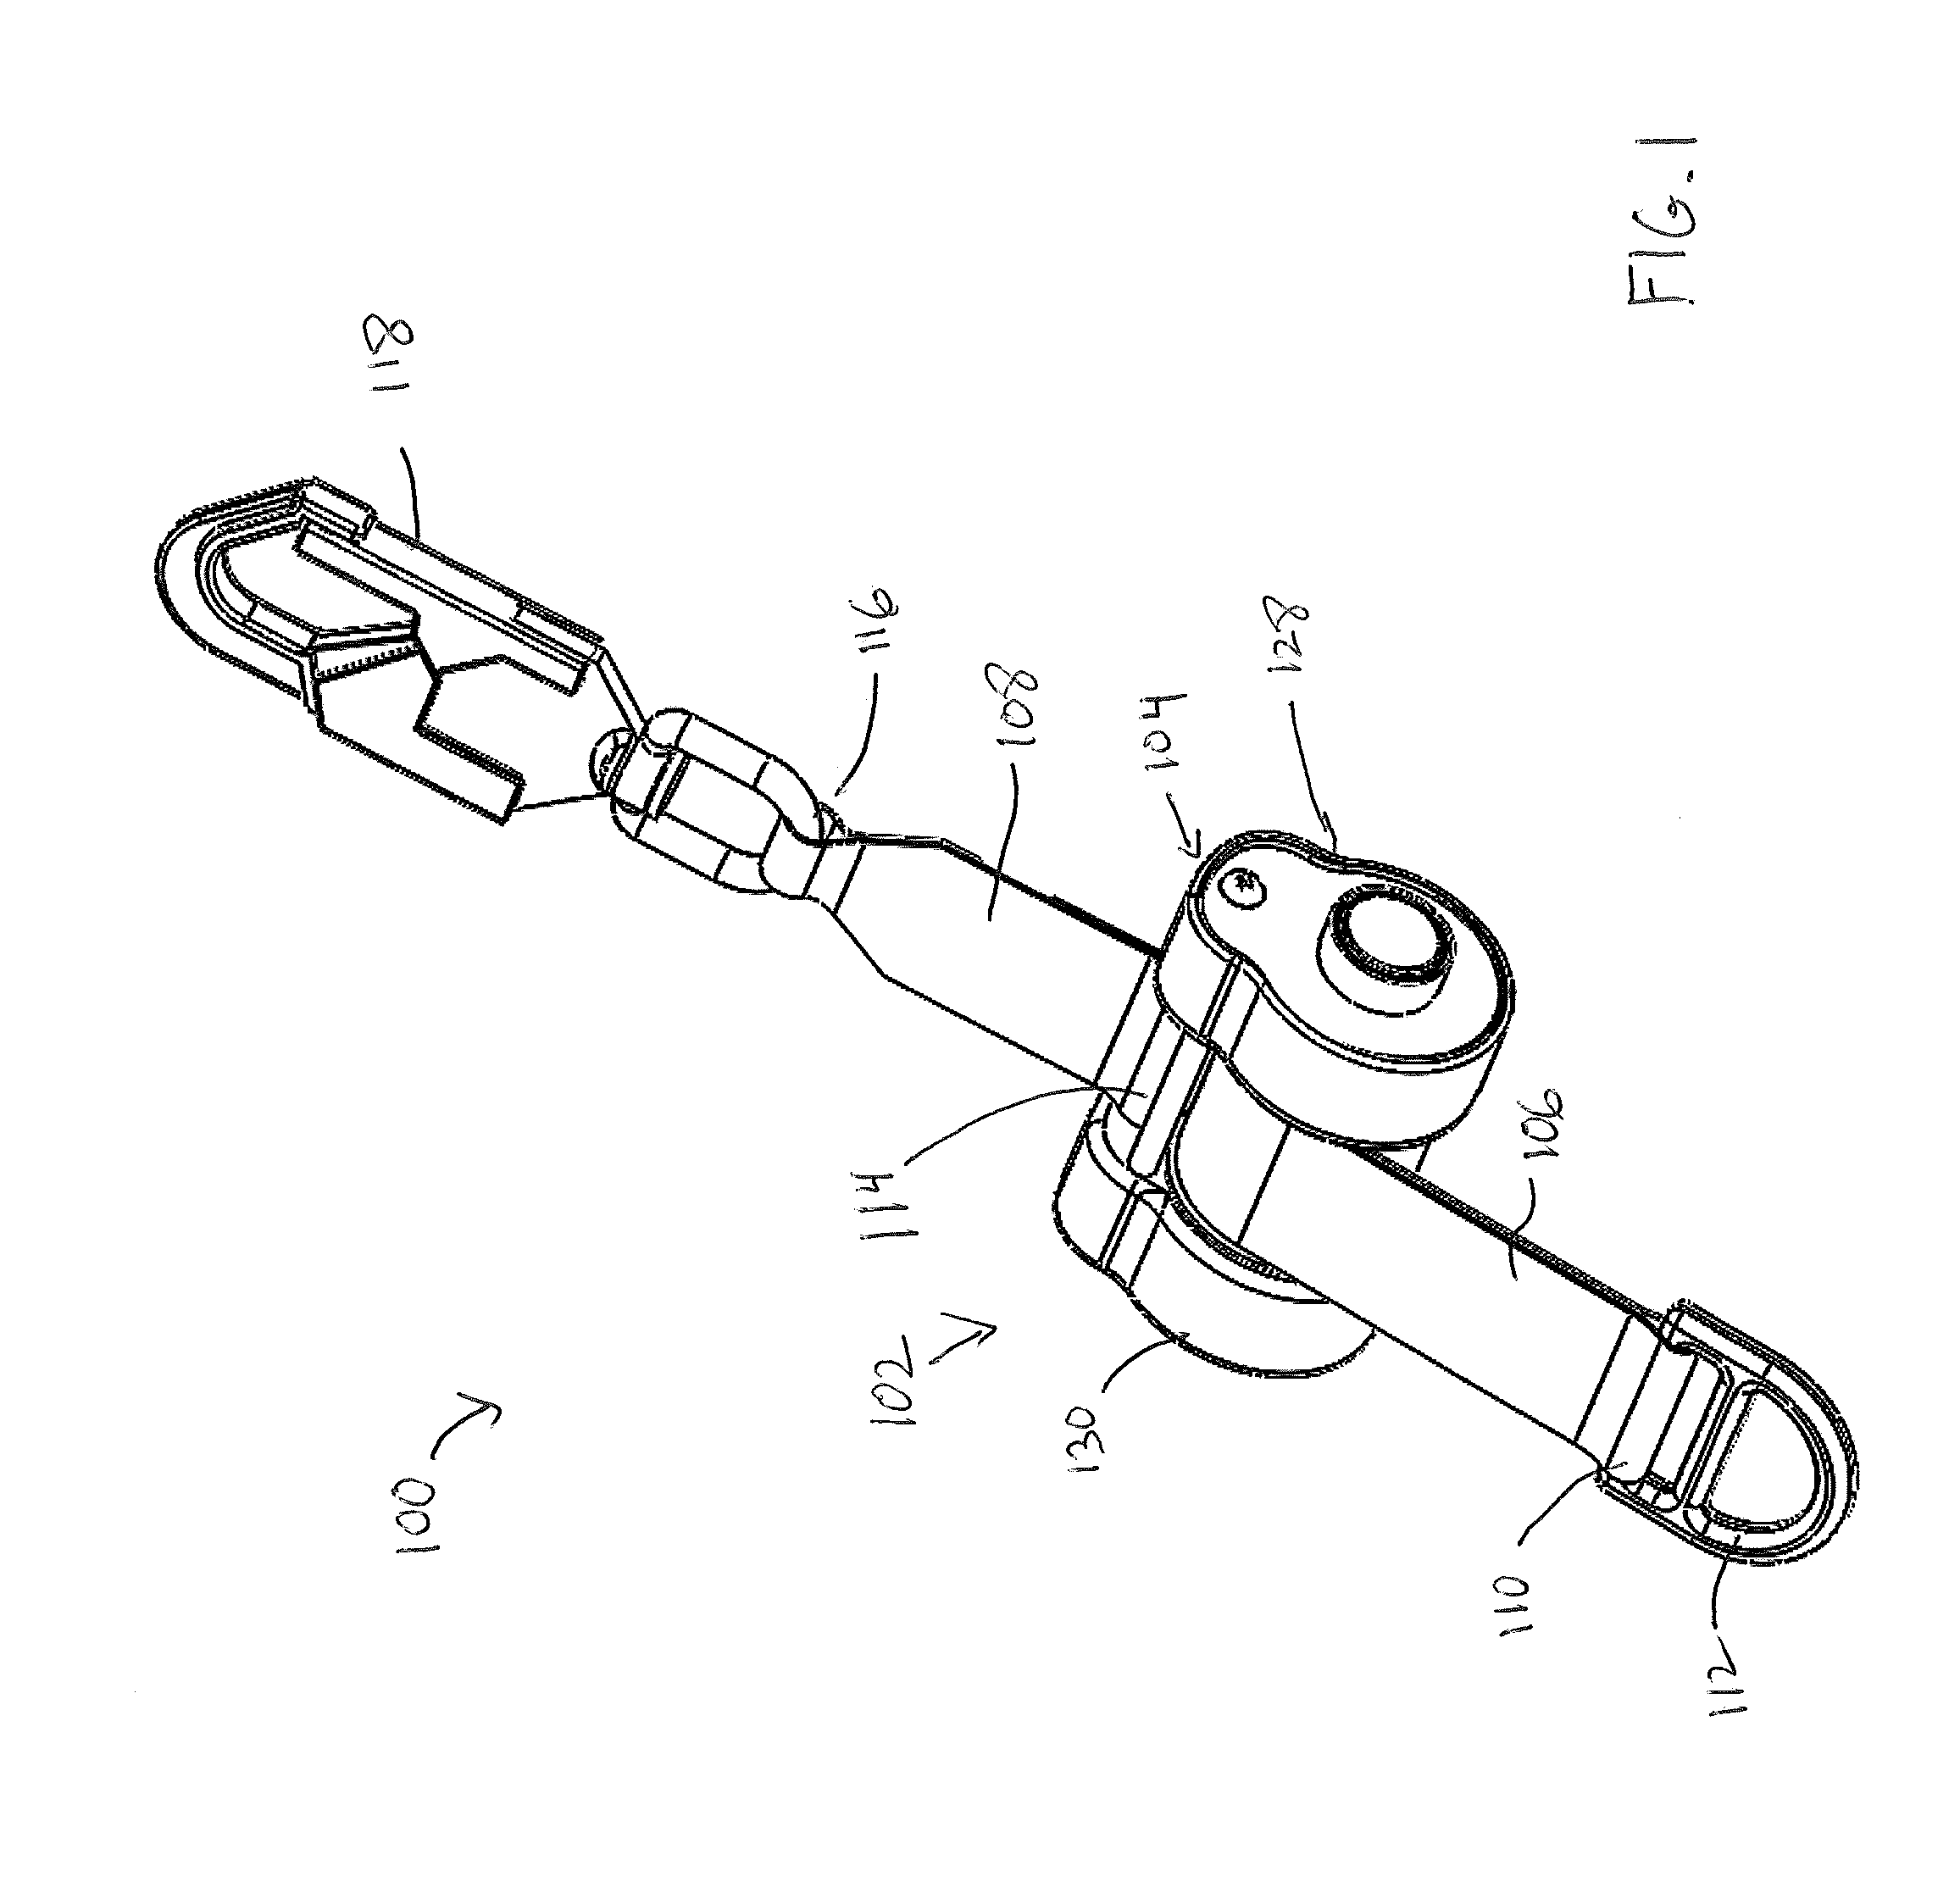 Mechanically Actuated Cargo Restraint System